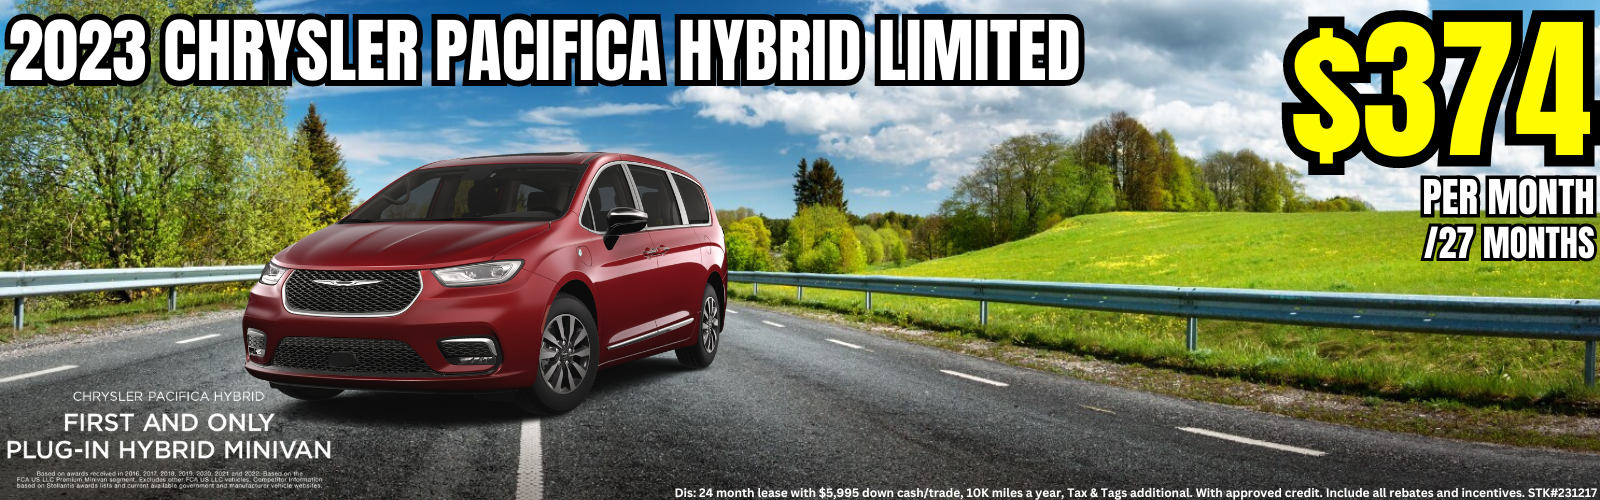 Chrysler Pacifica Hybrid Limited Lease Special